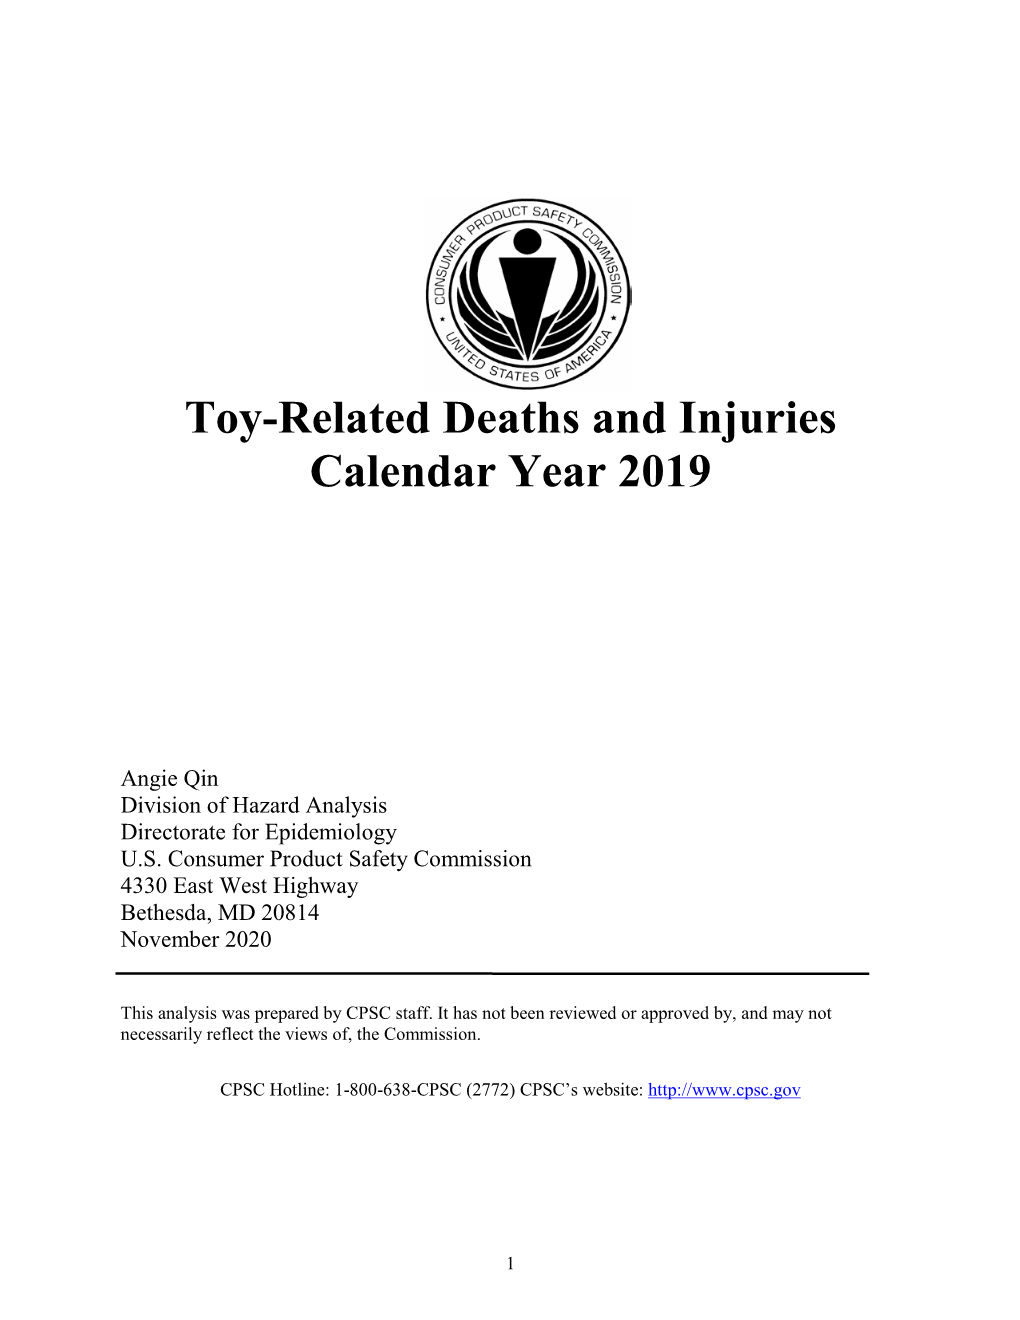 Toy-Related Deaths and Injuries, Calendar Year 2019